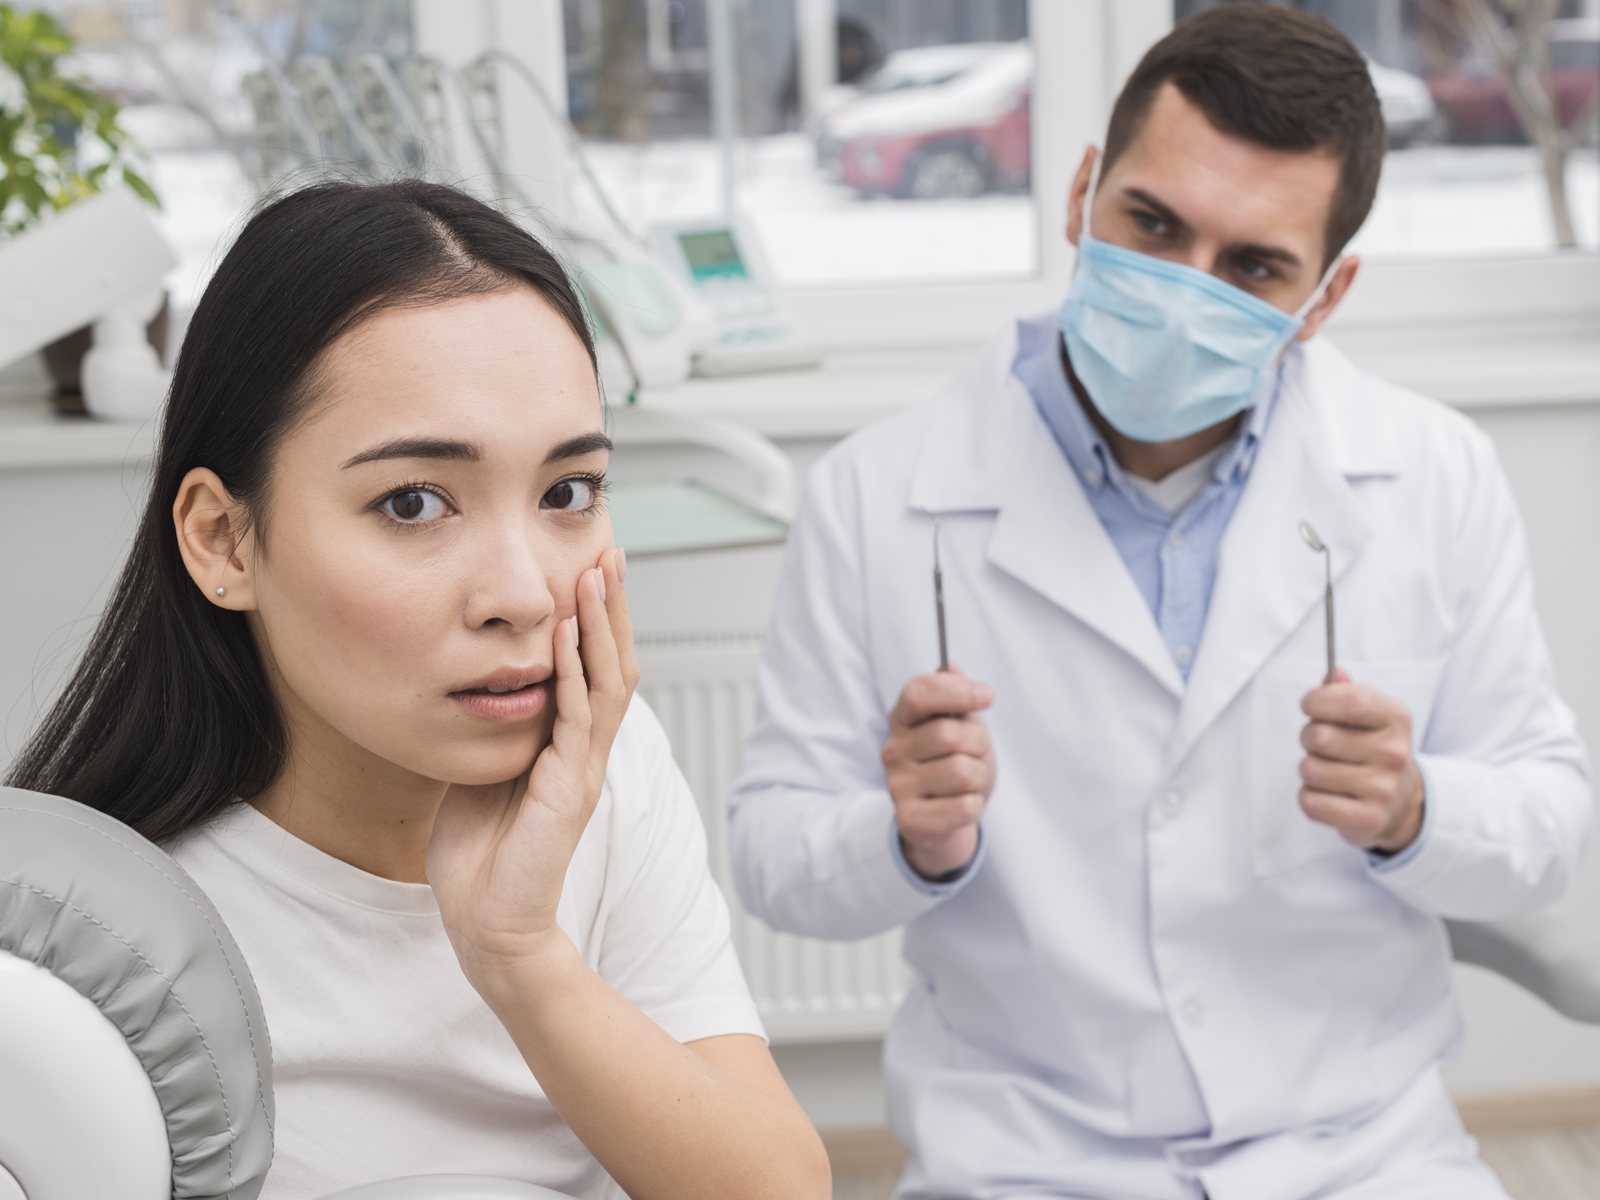 How to psychologically deal with the fear of dental procedures?